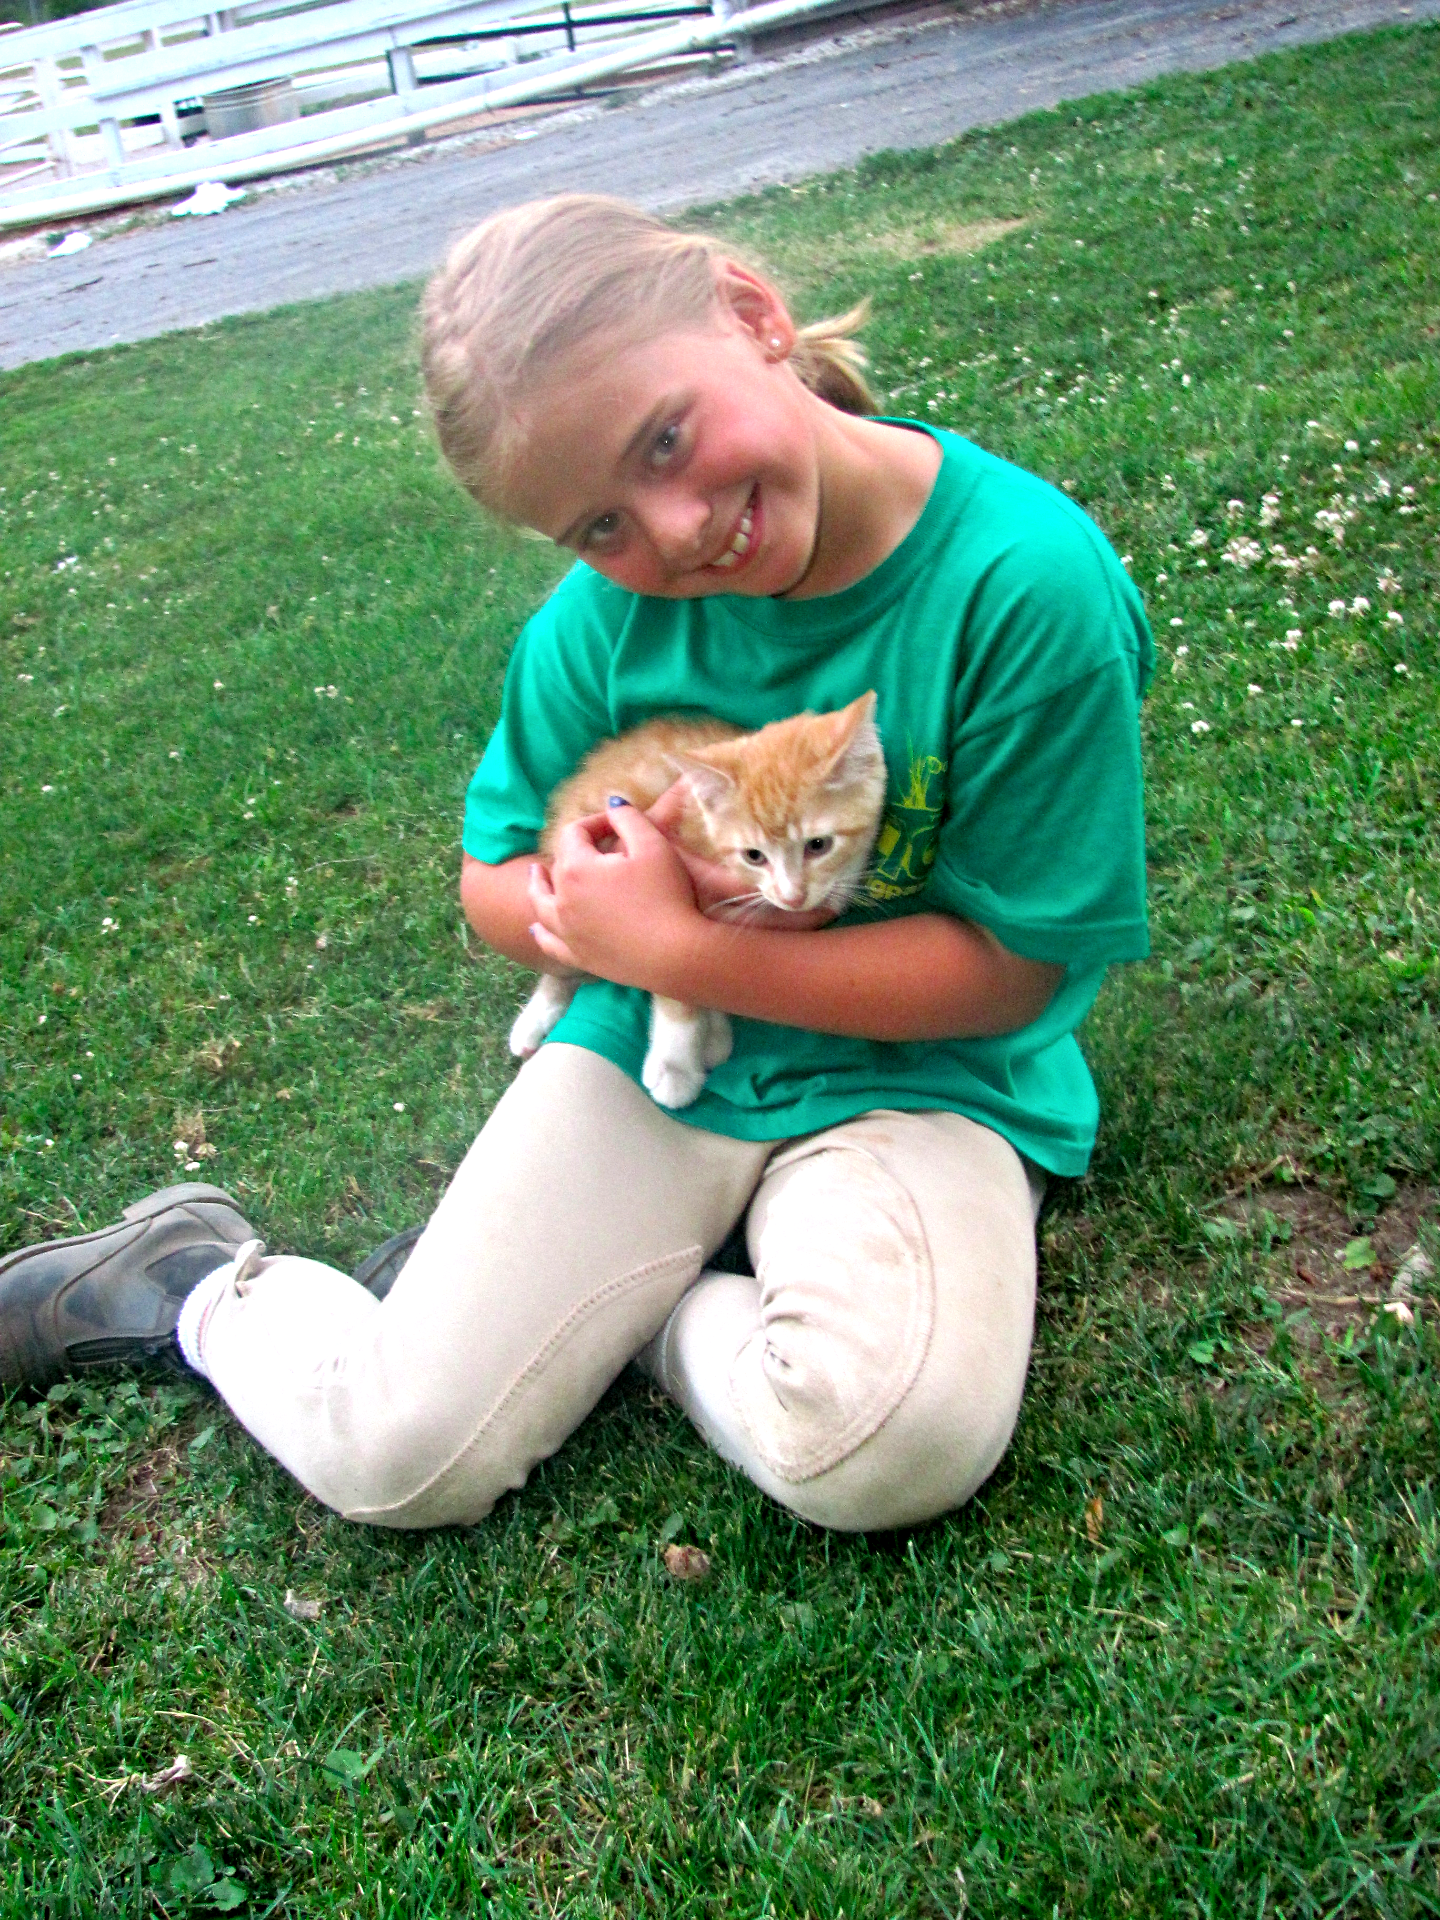 A young child holding a cat.